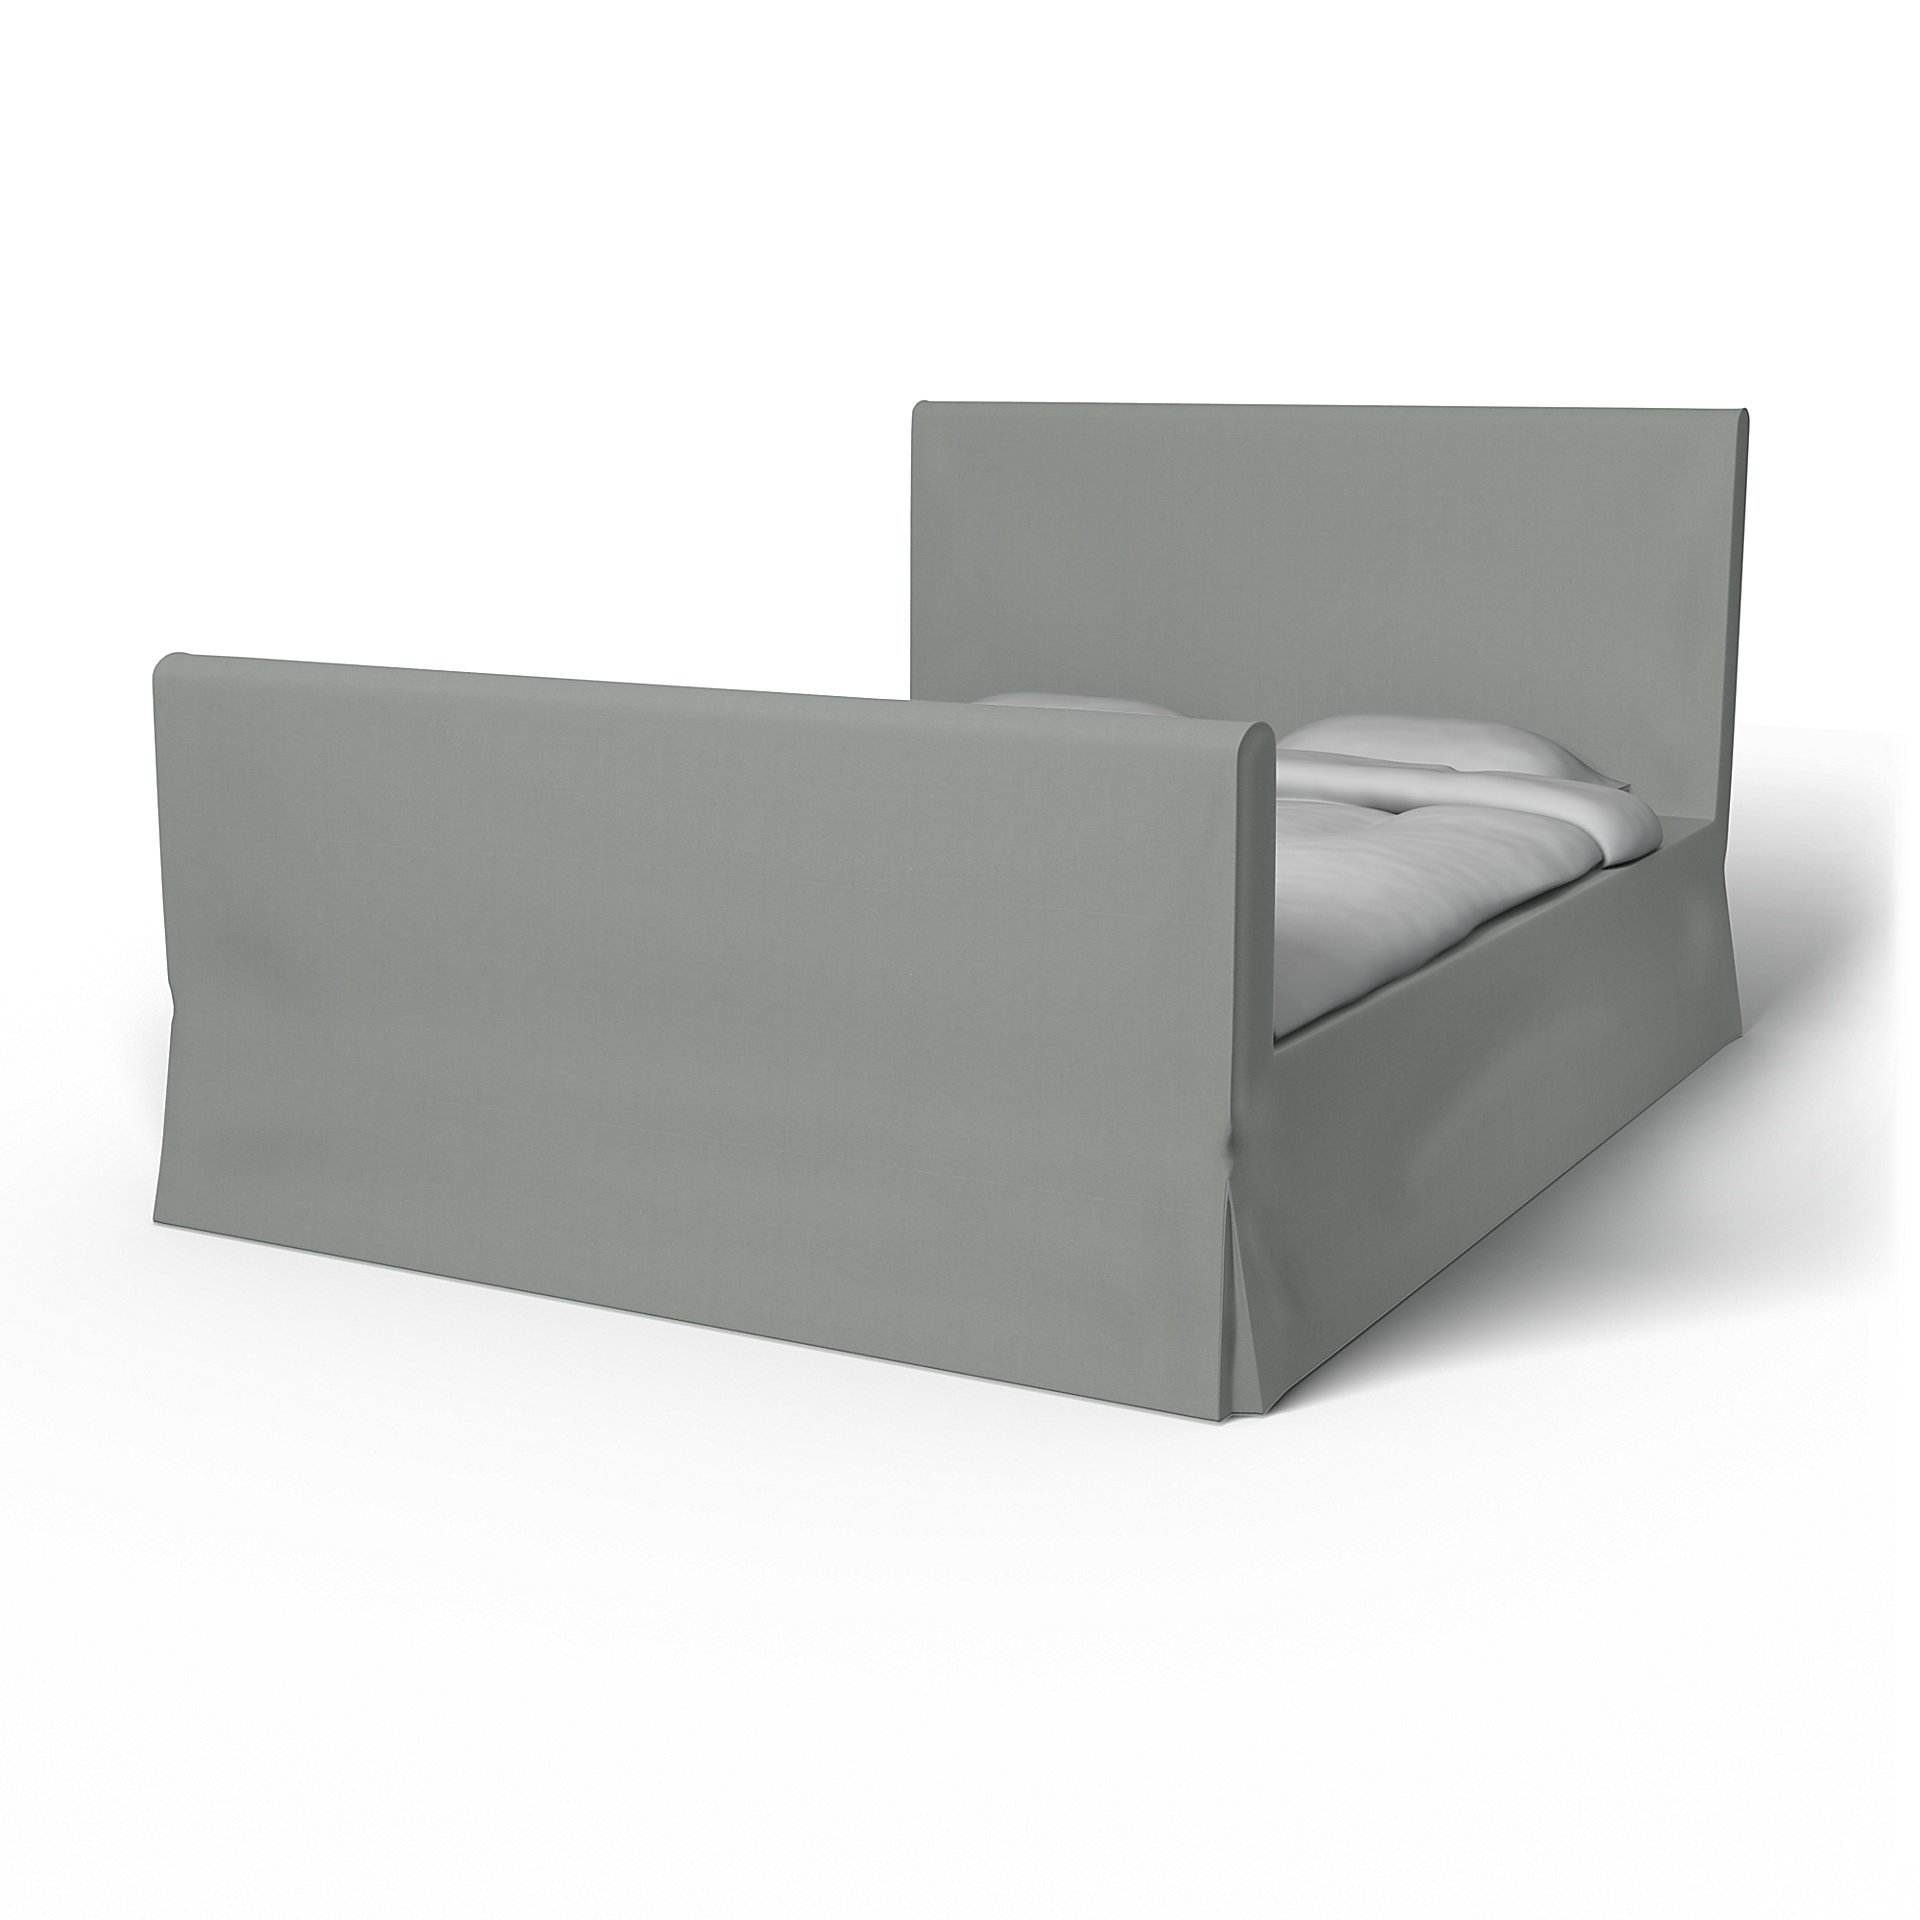 IKEA - Floro Bed Frame Cover, Drizzle, Cotton - Bemz